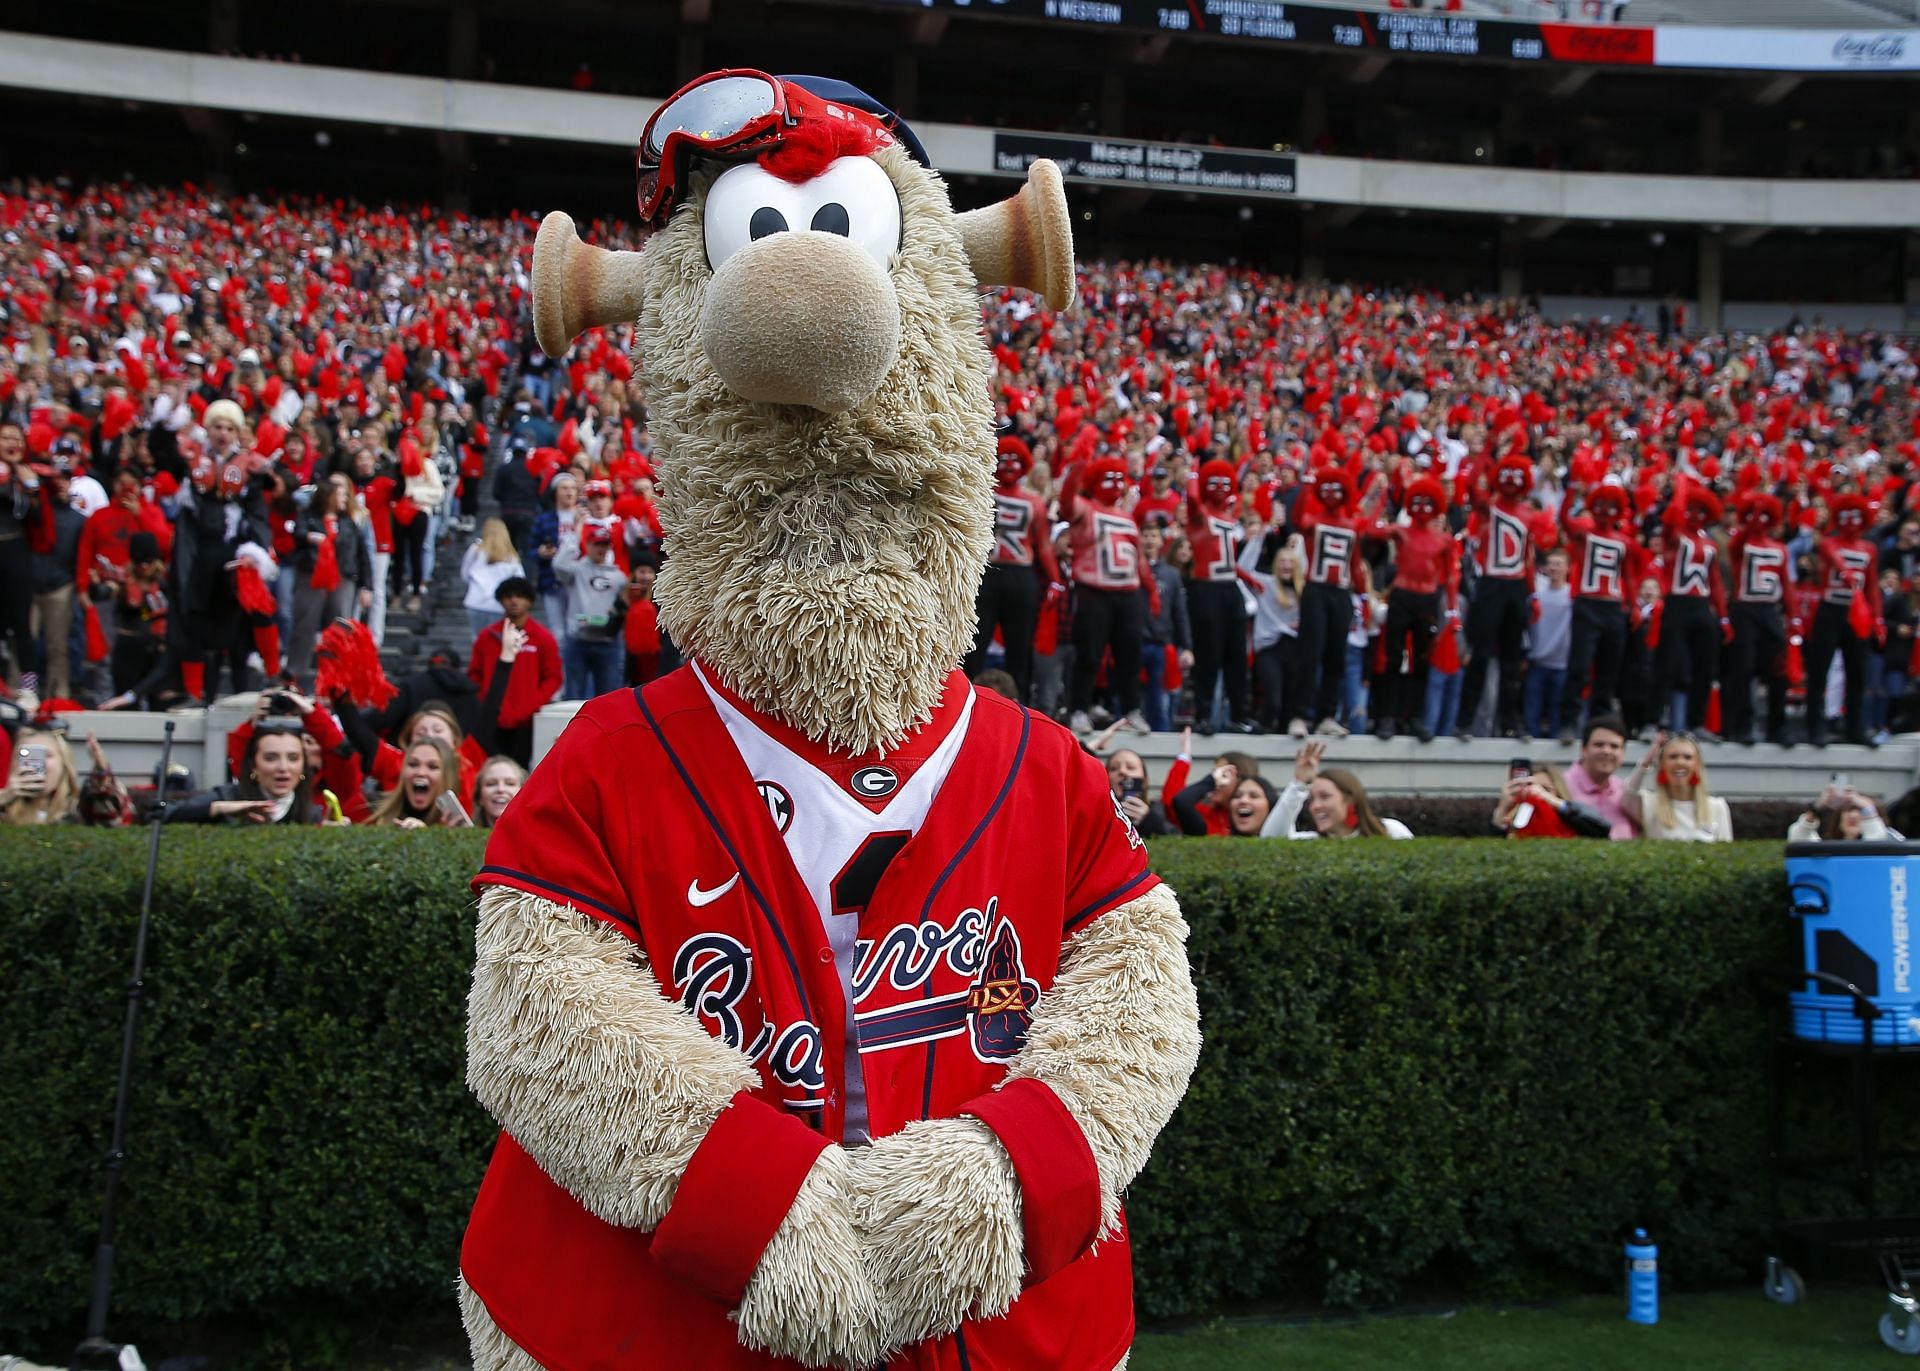 Braves mascot Blooper pokes fun at trophy making company for